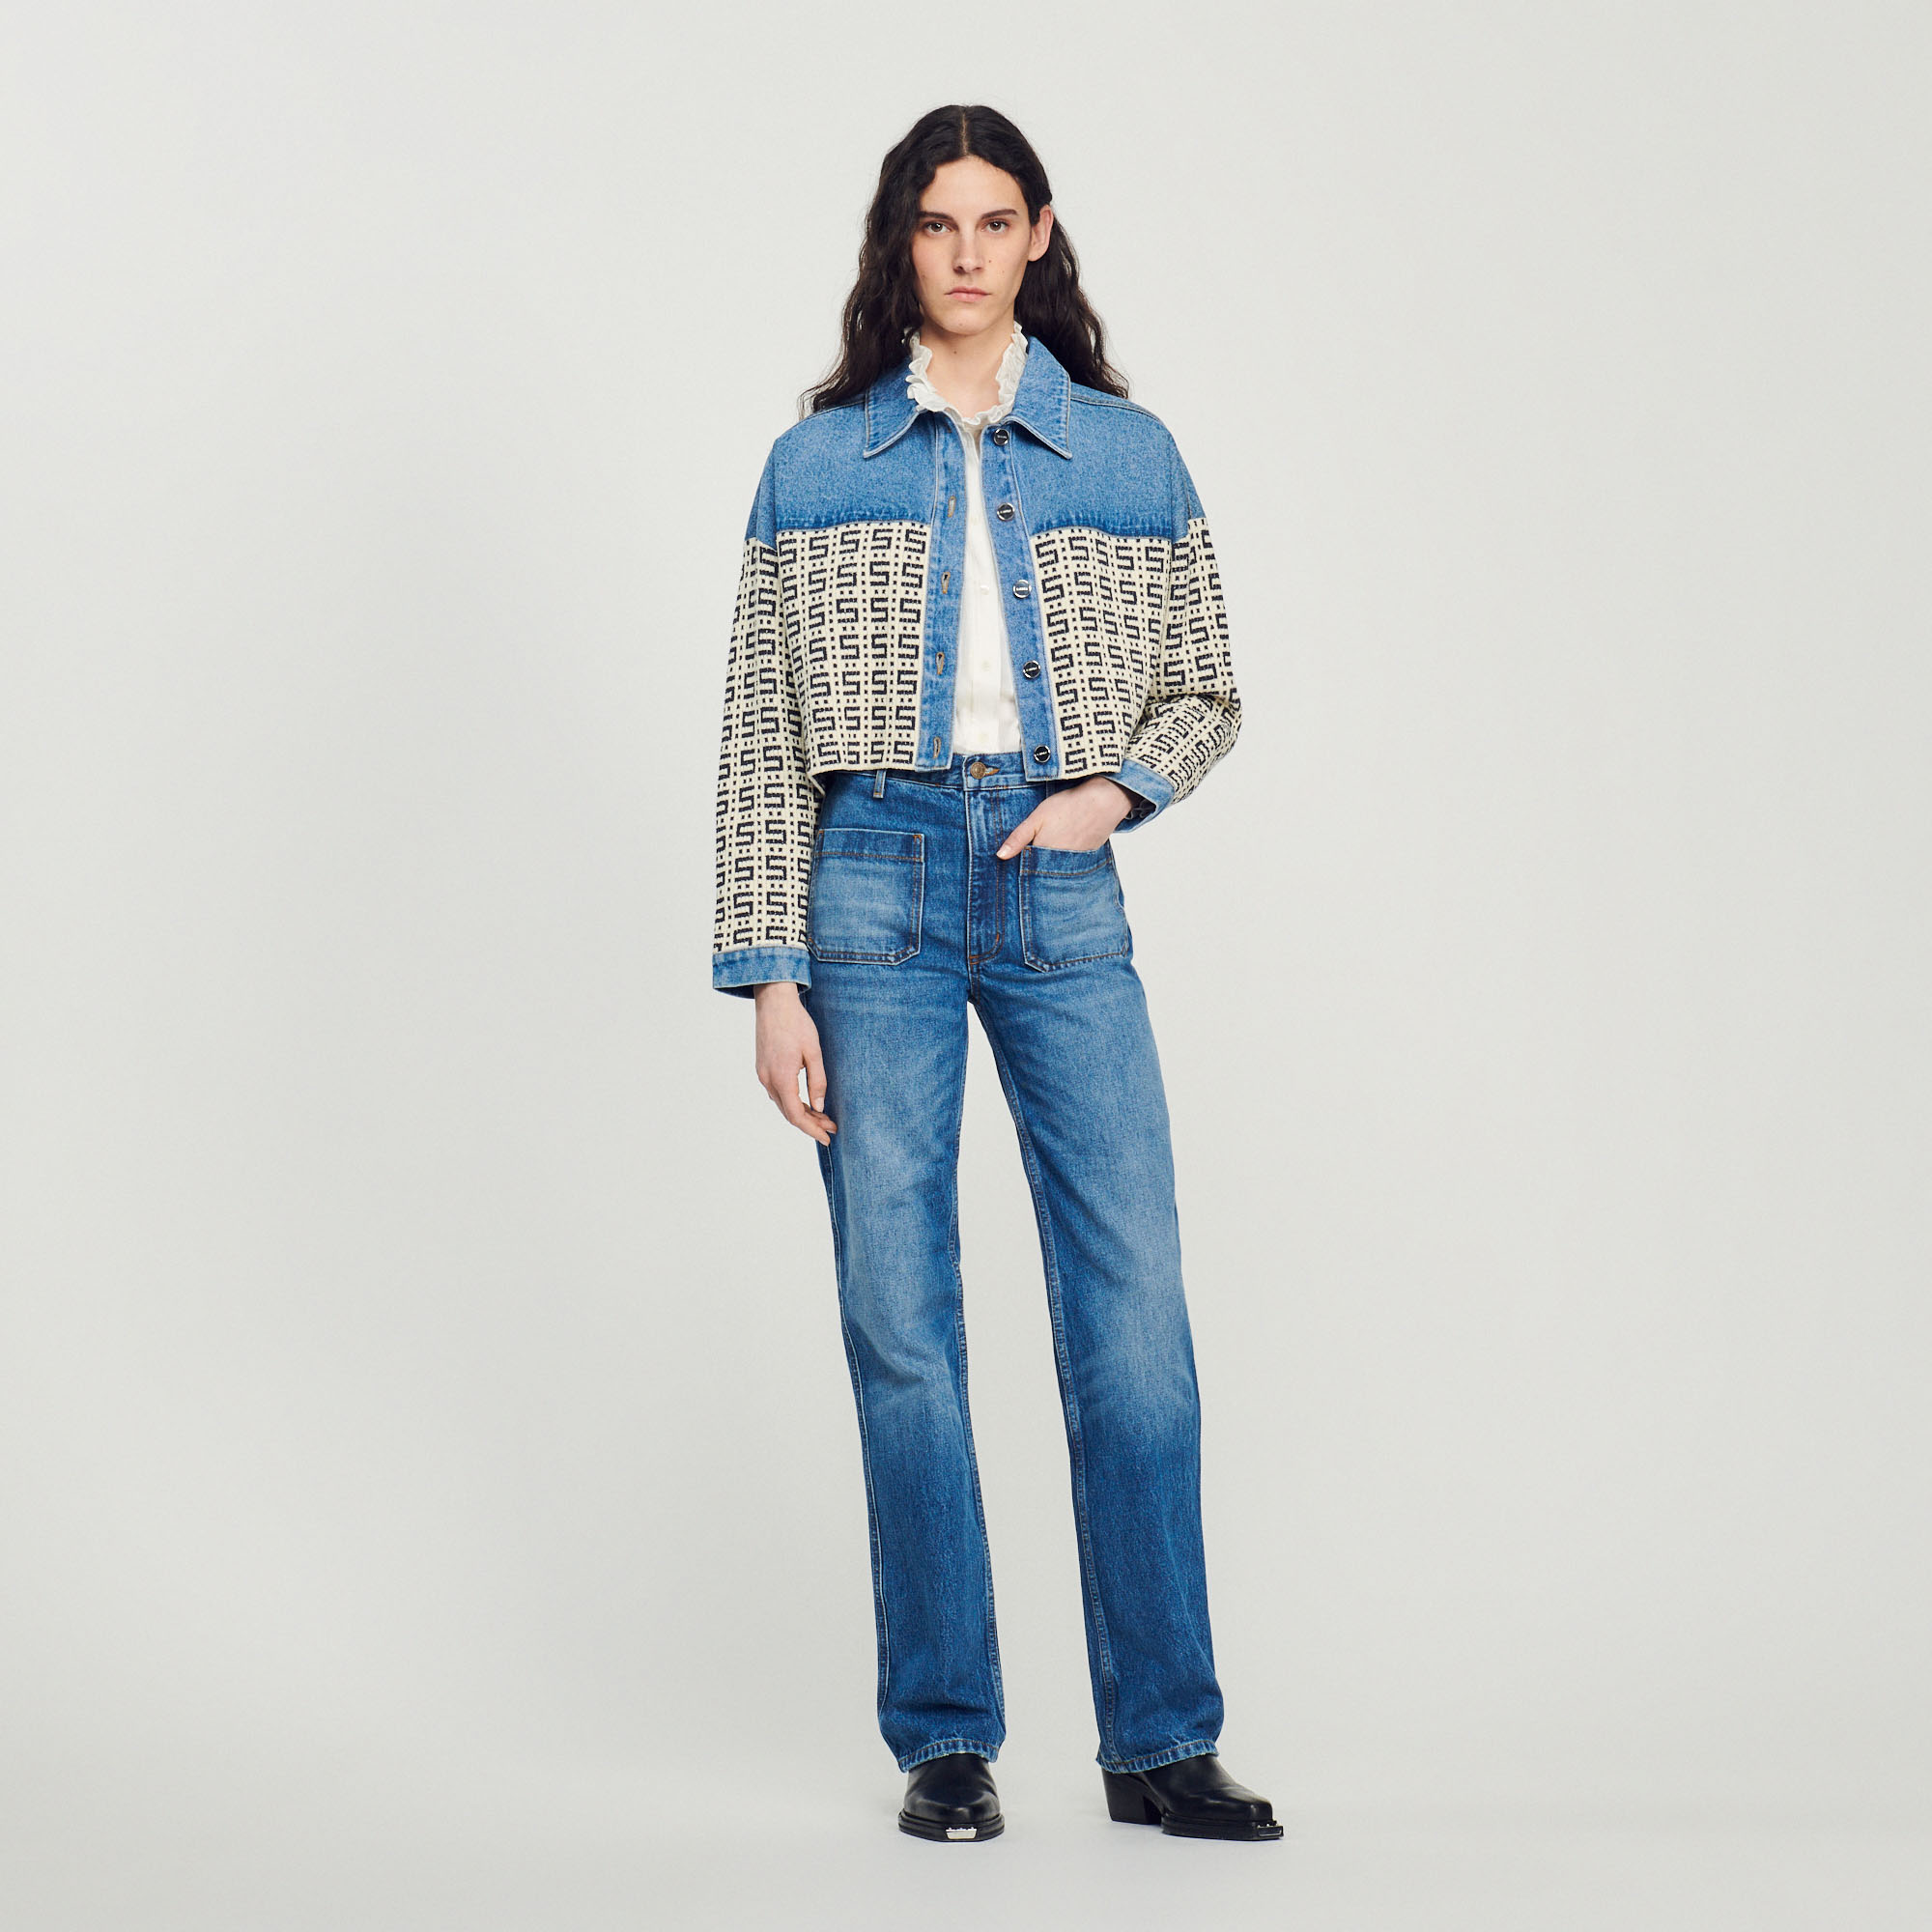 Sandro cotton Cropped coatigan in denim and a logo jacquard knit, featuring long sleeves and a central front fastening with button placket